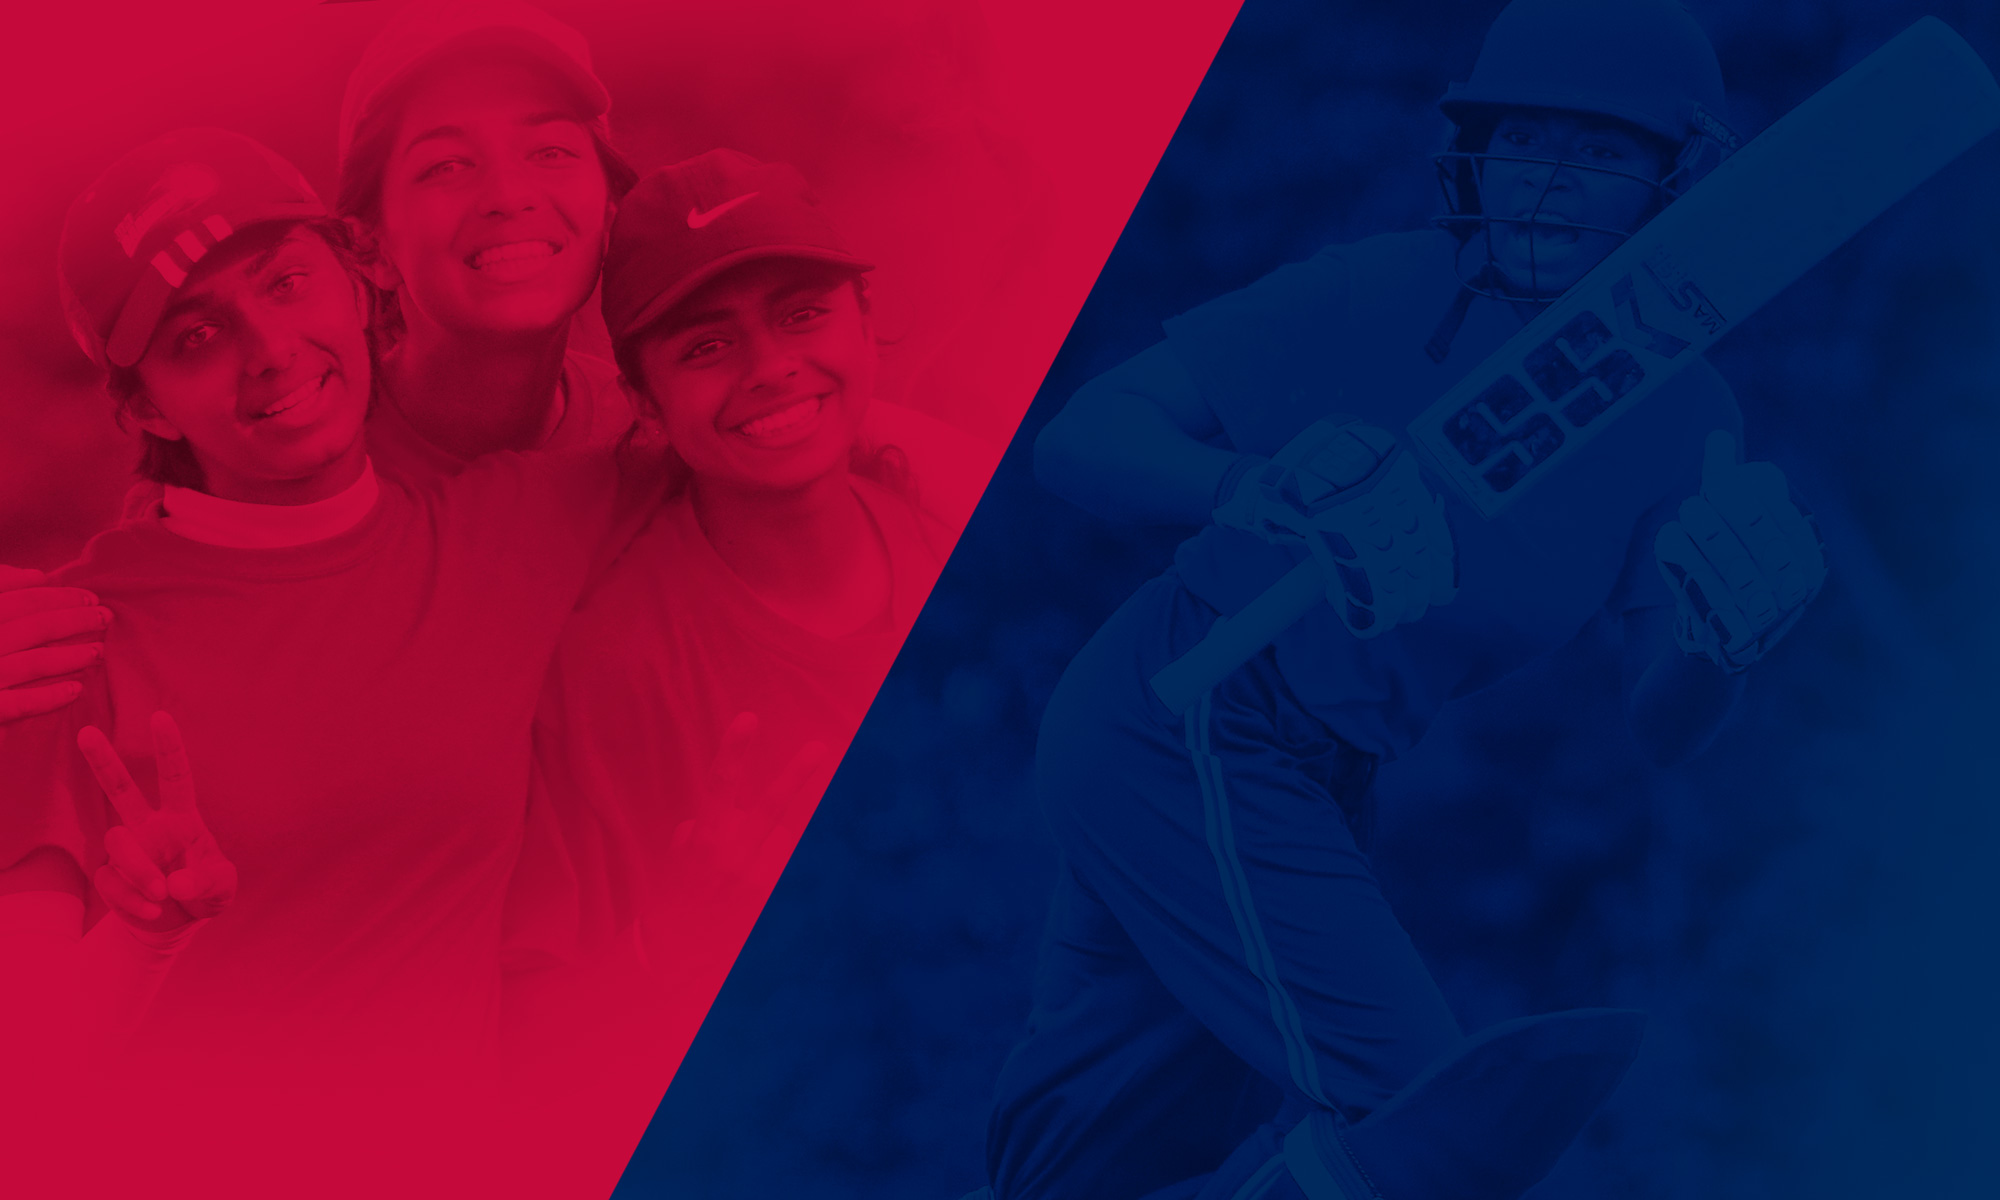 USA Cricket Announces Growth of Women’s Intraregional Competition Domestic Pathway and the Appointment of Volunteer Team Coordinators